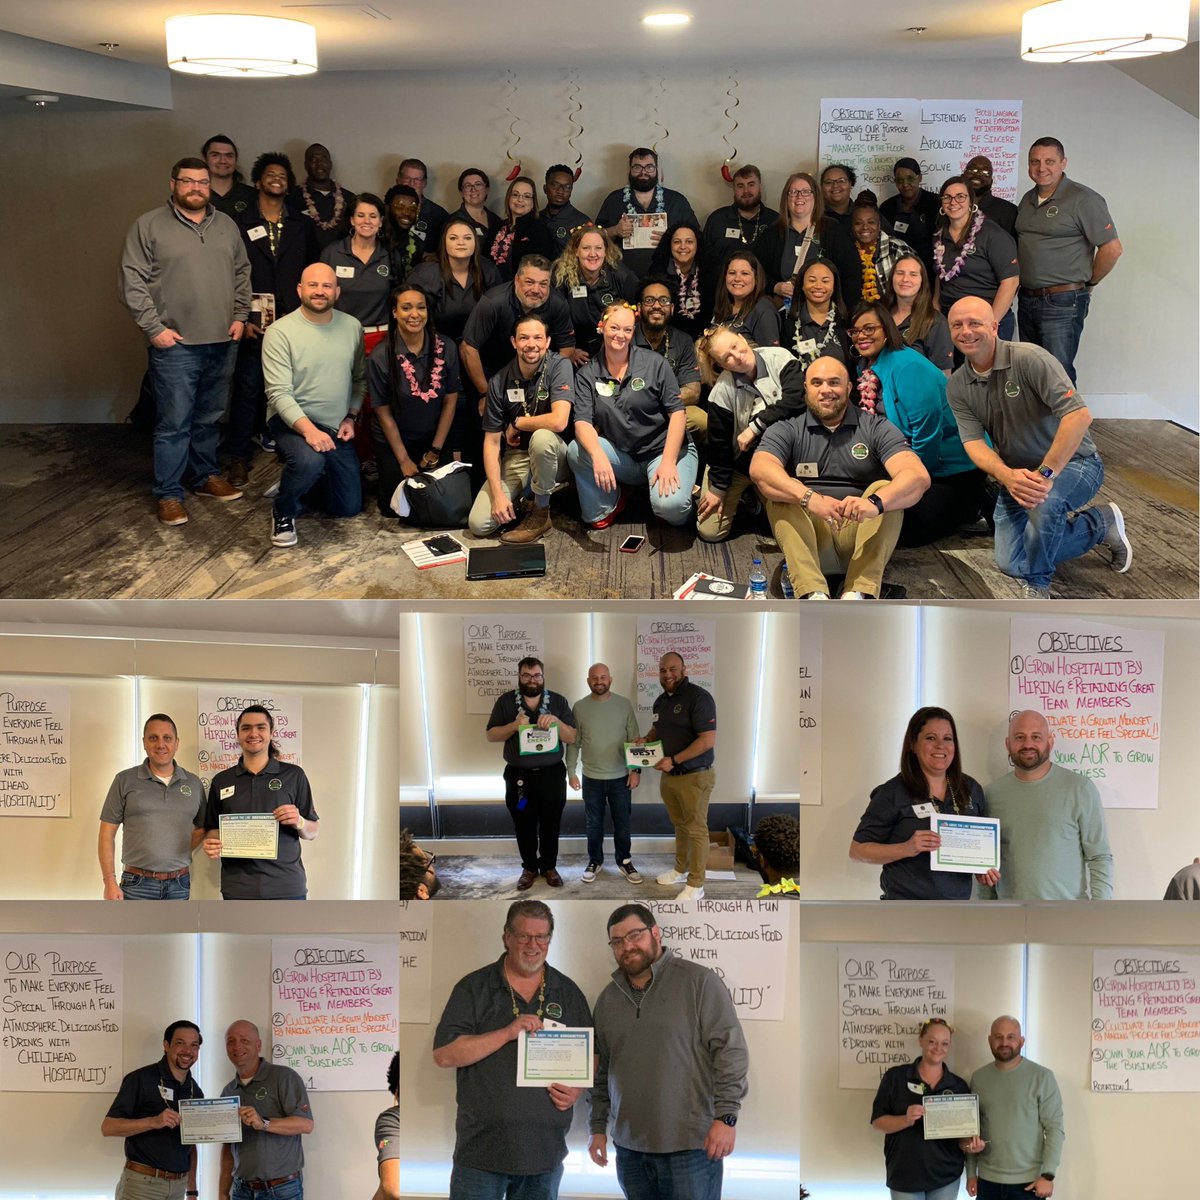 What a great 2 days of Town Halls in Baton Rouge! Progress being made by the New Orleans, Lafayette and Baton Rouge restaurants, and because of breakouts facilitated by @SavoieRay @CRUT8180 and @BrianAdkins1 these managers are ready to #chilisgrow themselves and the business!